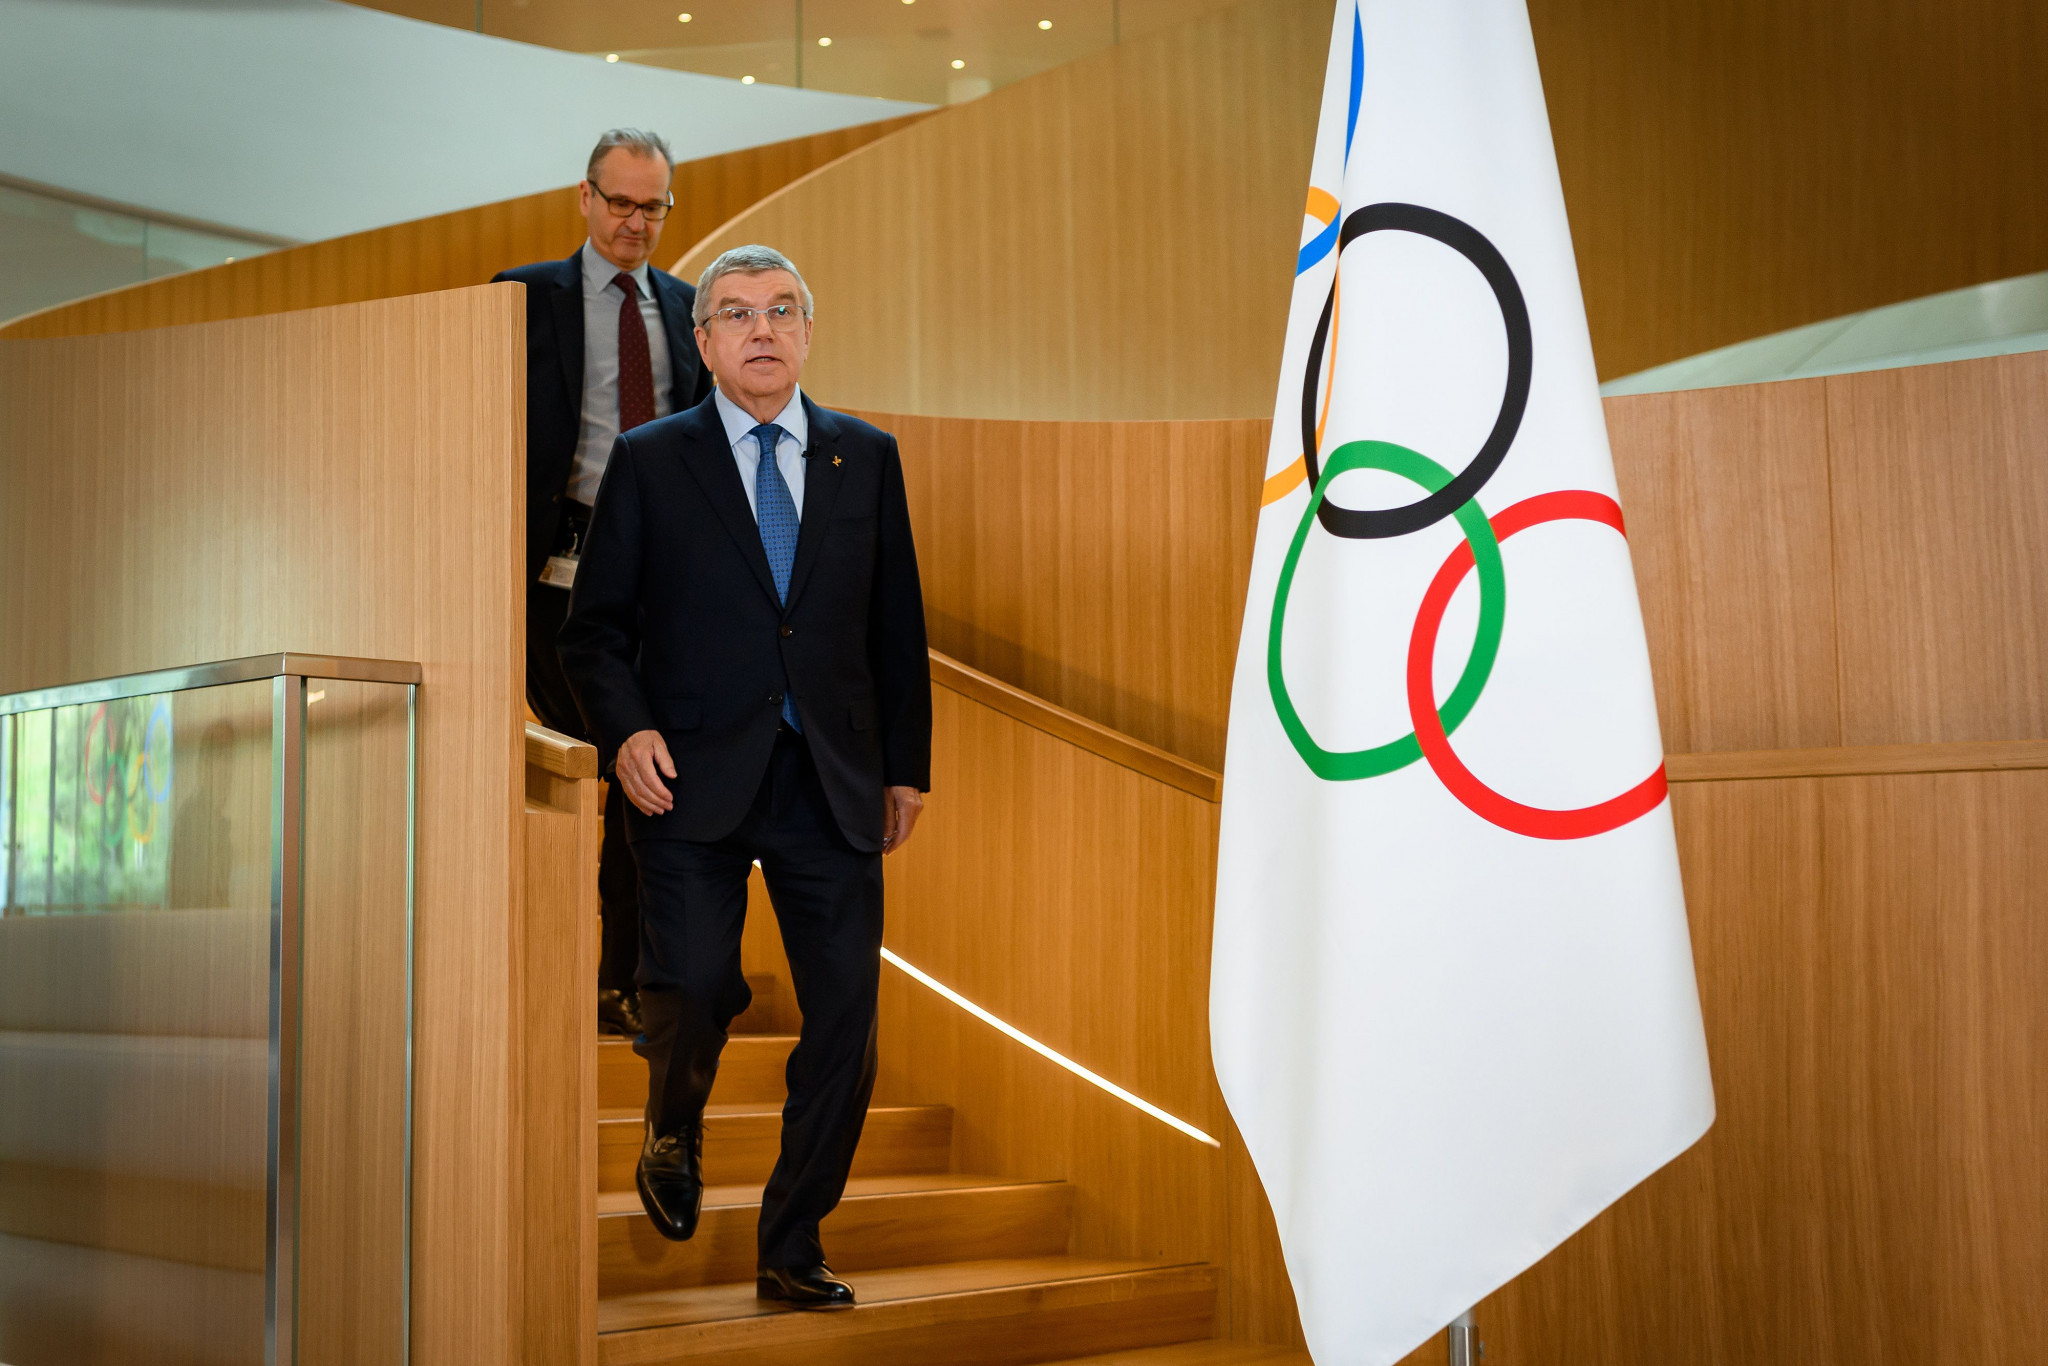 IOC President Thomas Bach has offered reassurances about the Games taking place as planned ©Getty Images